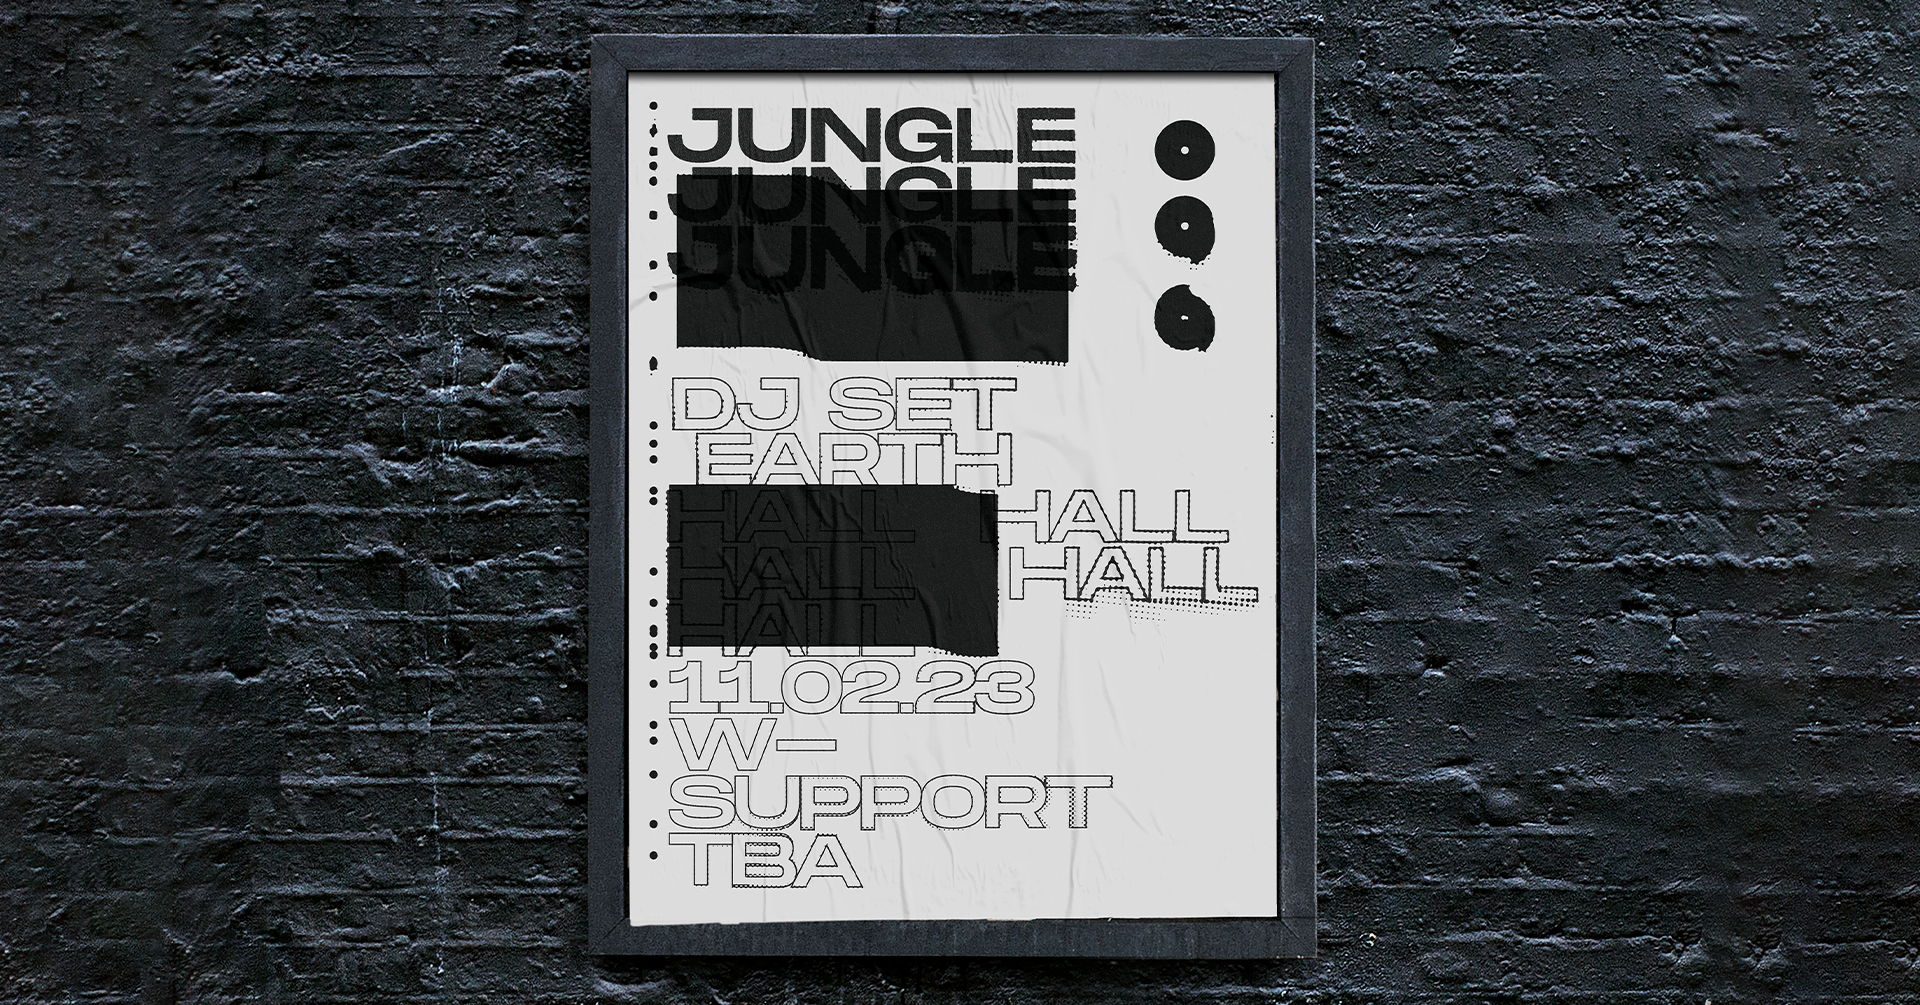 Jungle extended set and more TBA 